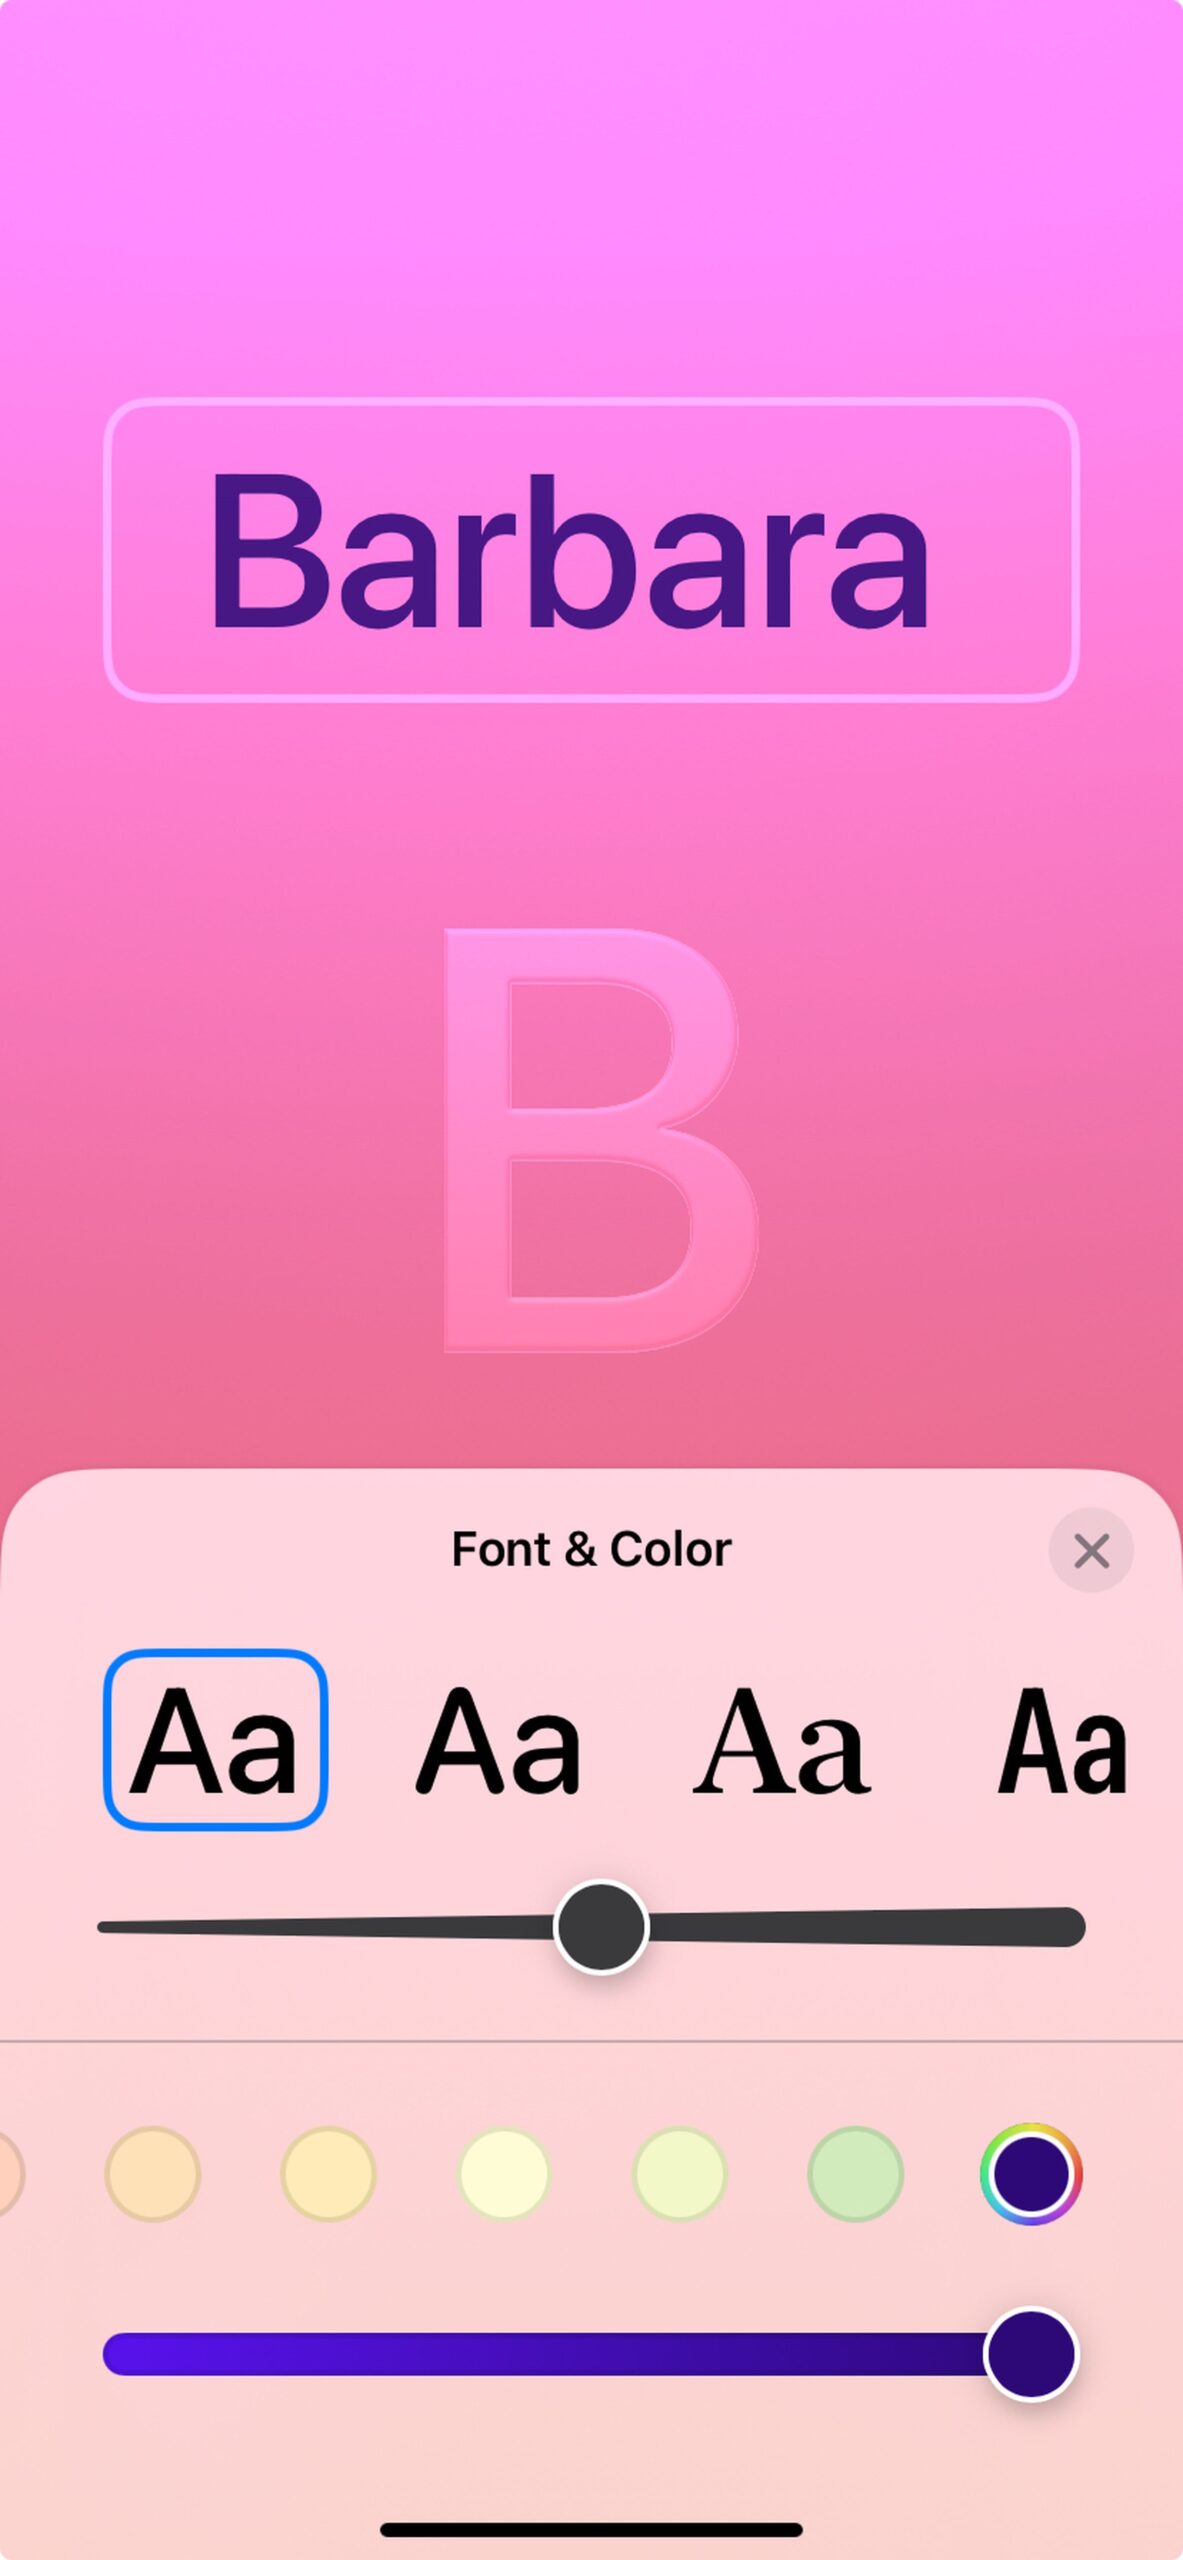 PInk-purple background with the name Barbara on top and the initial B in a circle with font and color controls on the bottom.